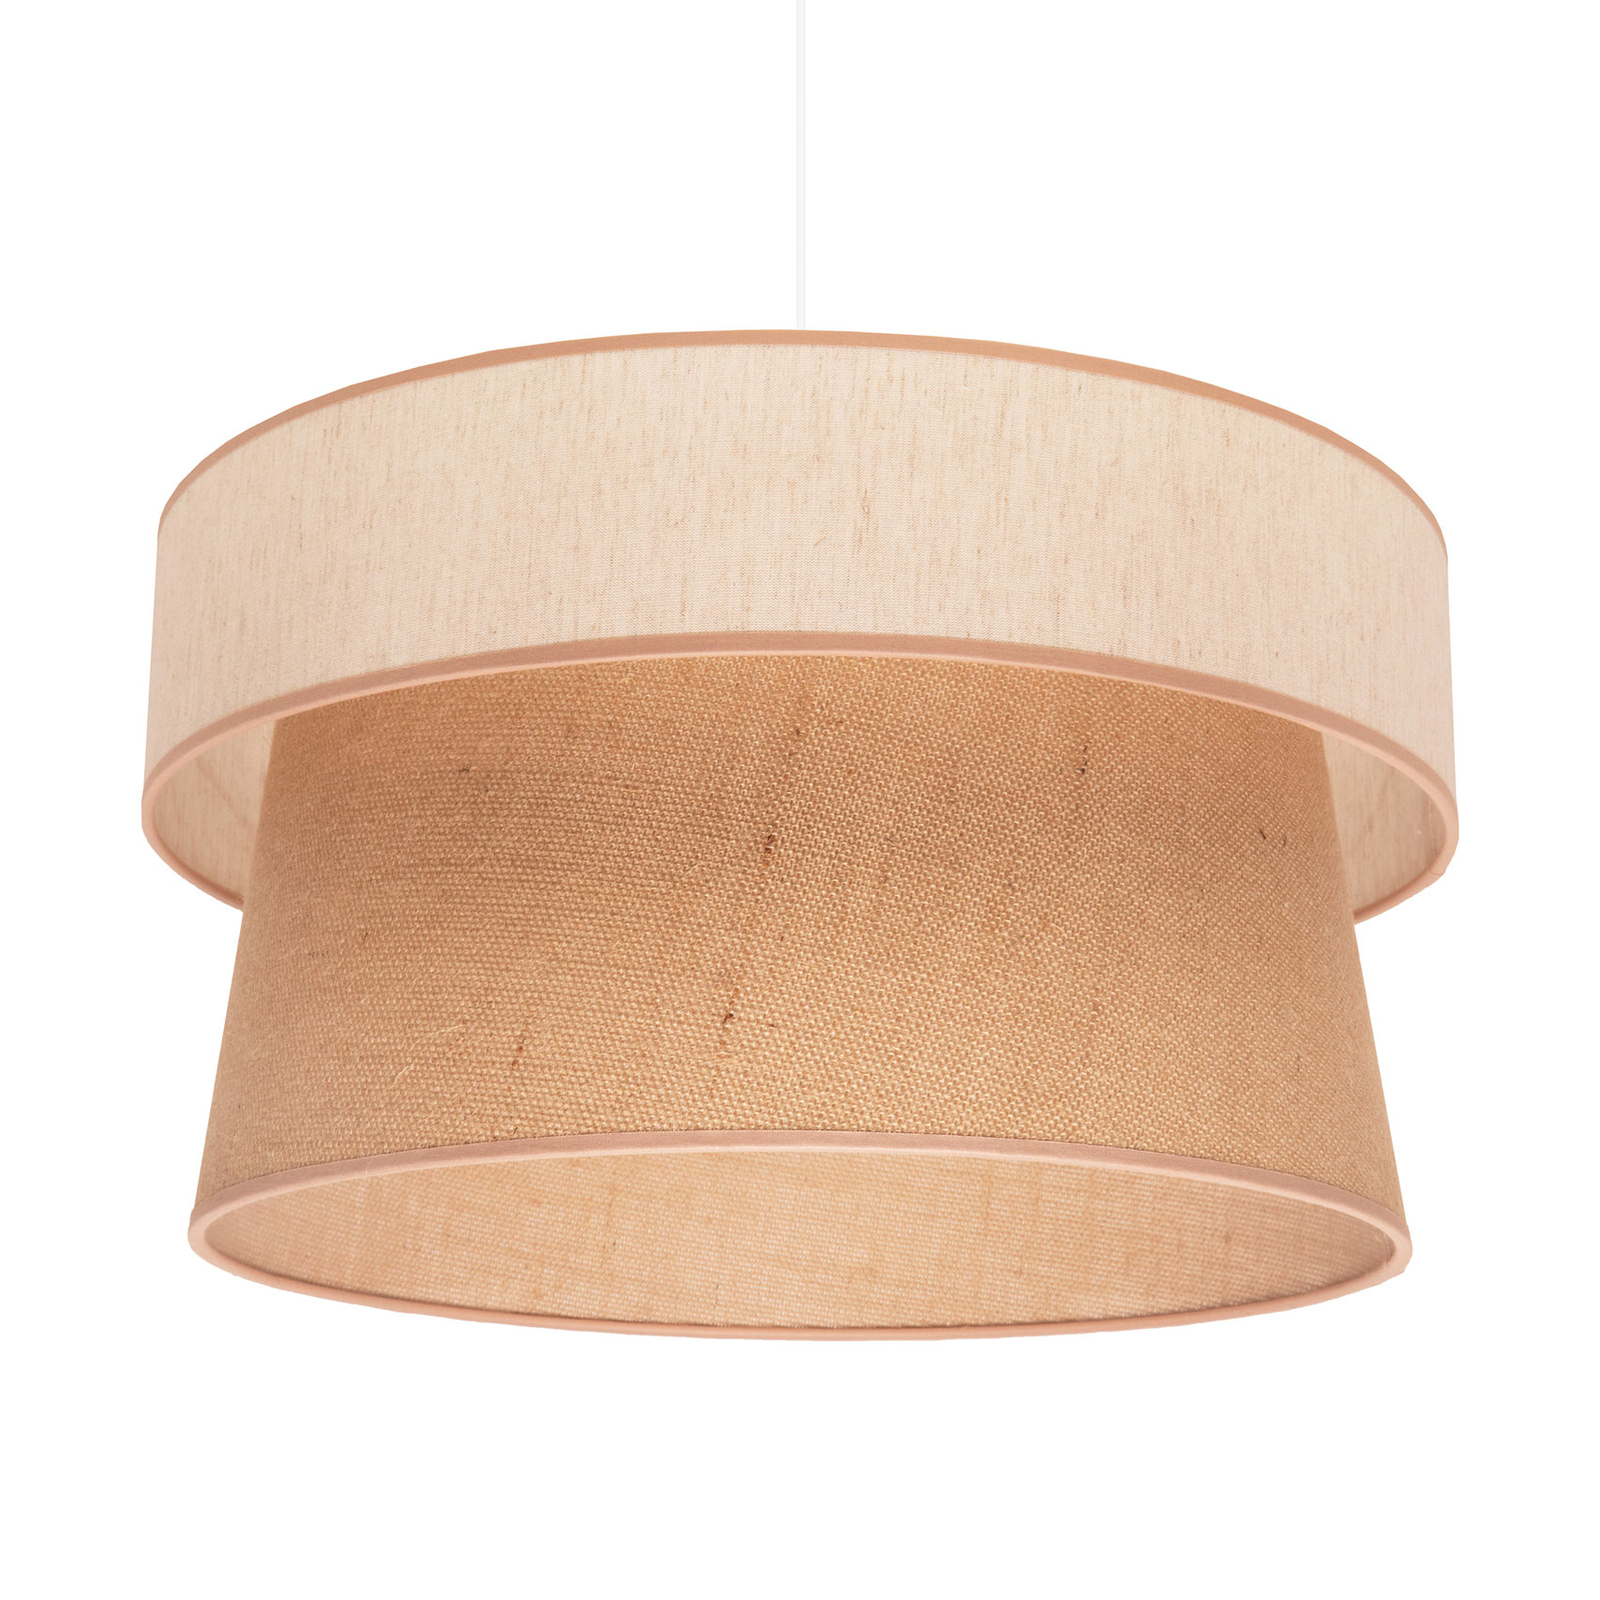 Etnic hanging light, double lampshade, beige/brown